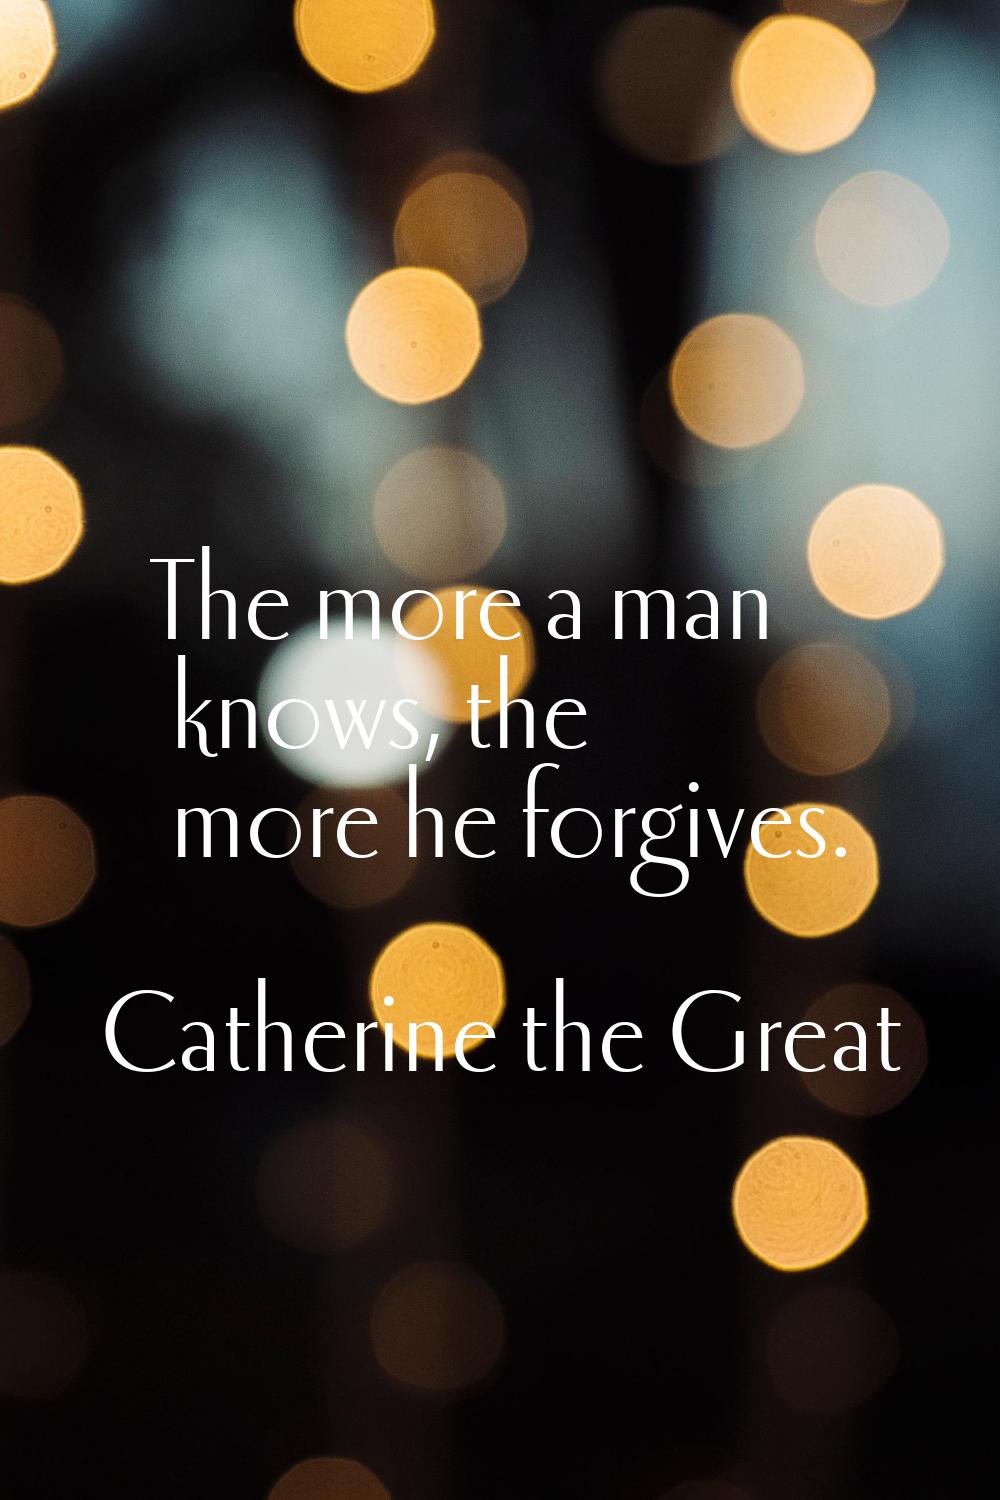 The more a man knows, the more he forgives.